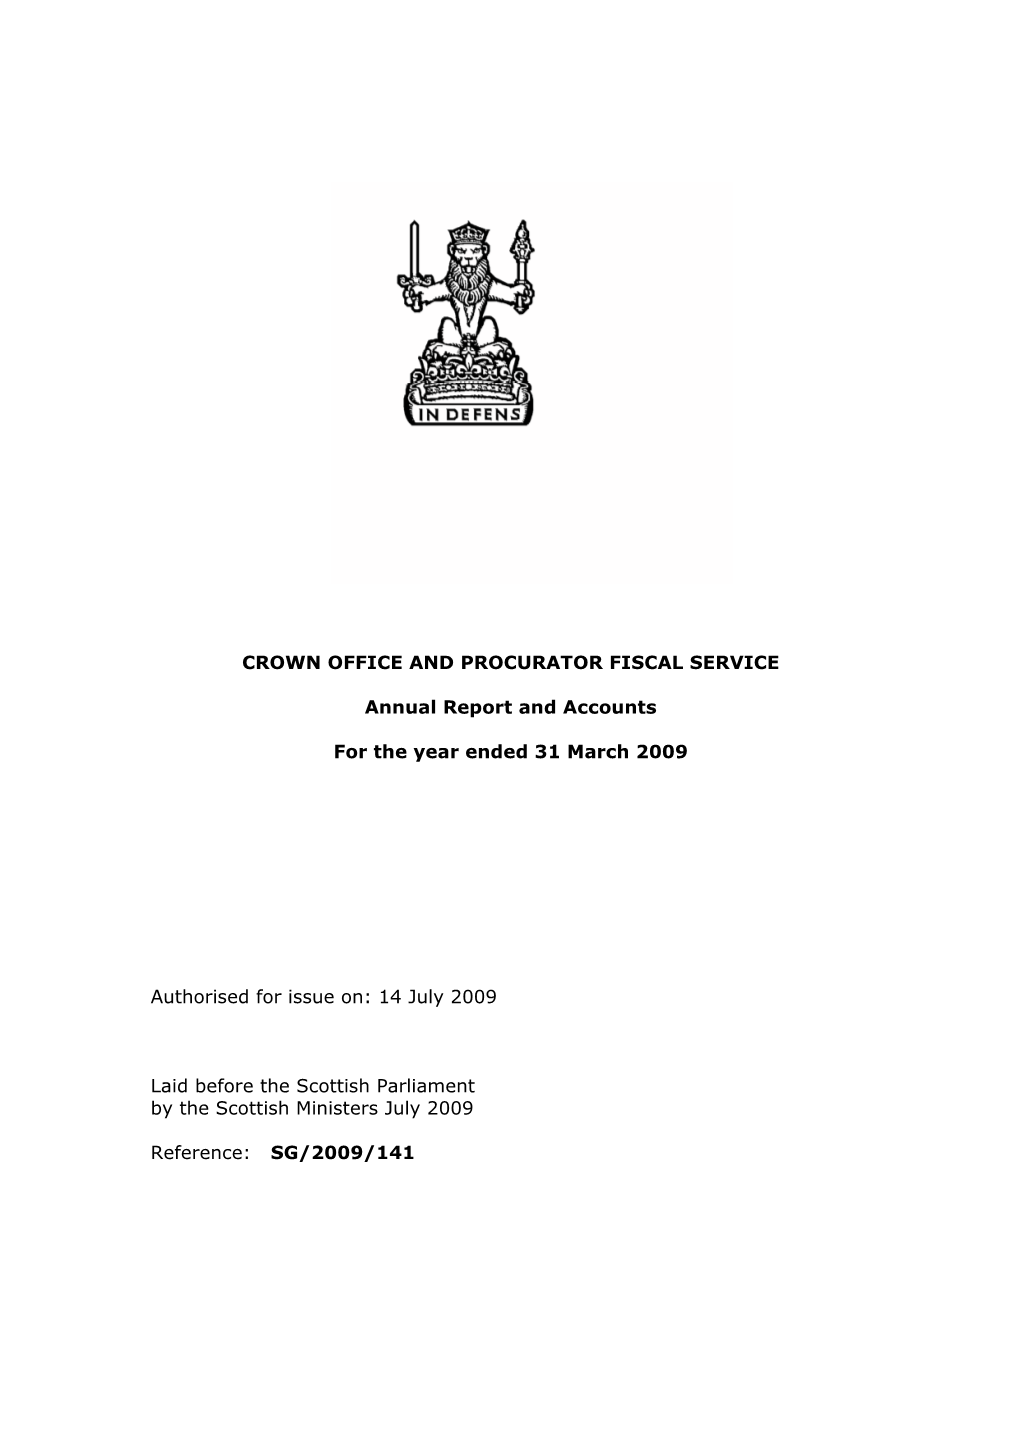 Crown Office and Procurator Fiscal Service